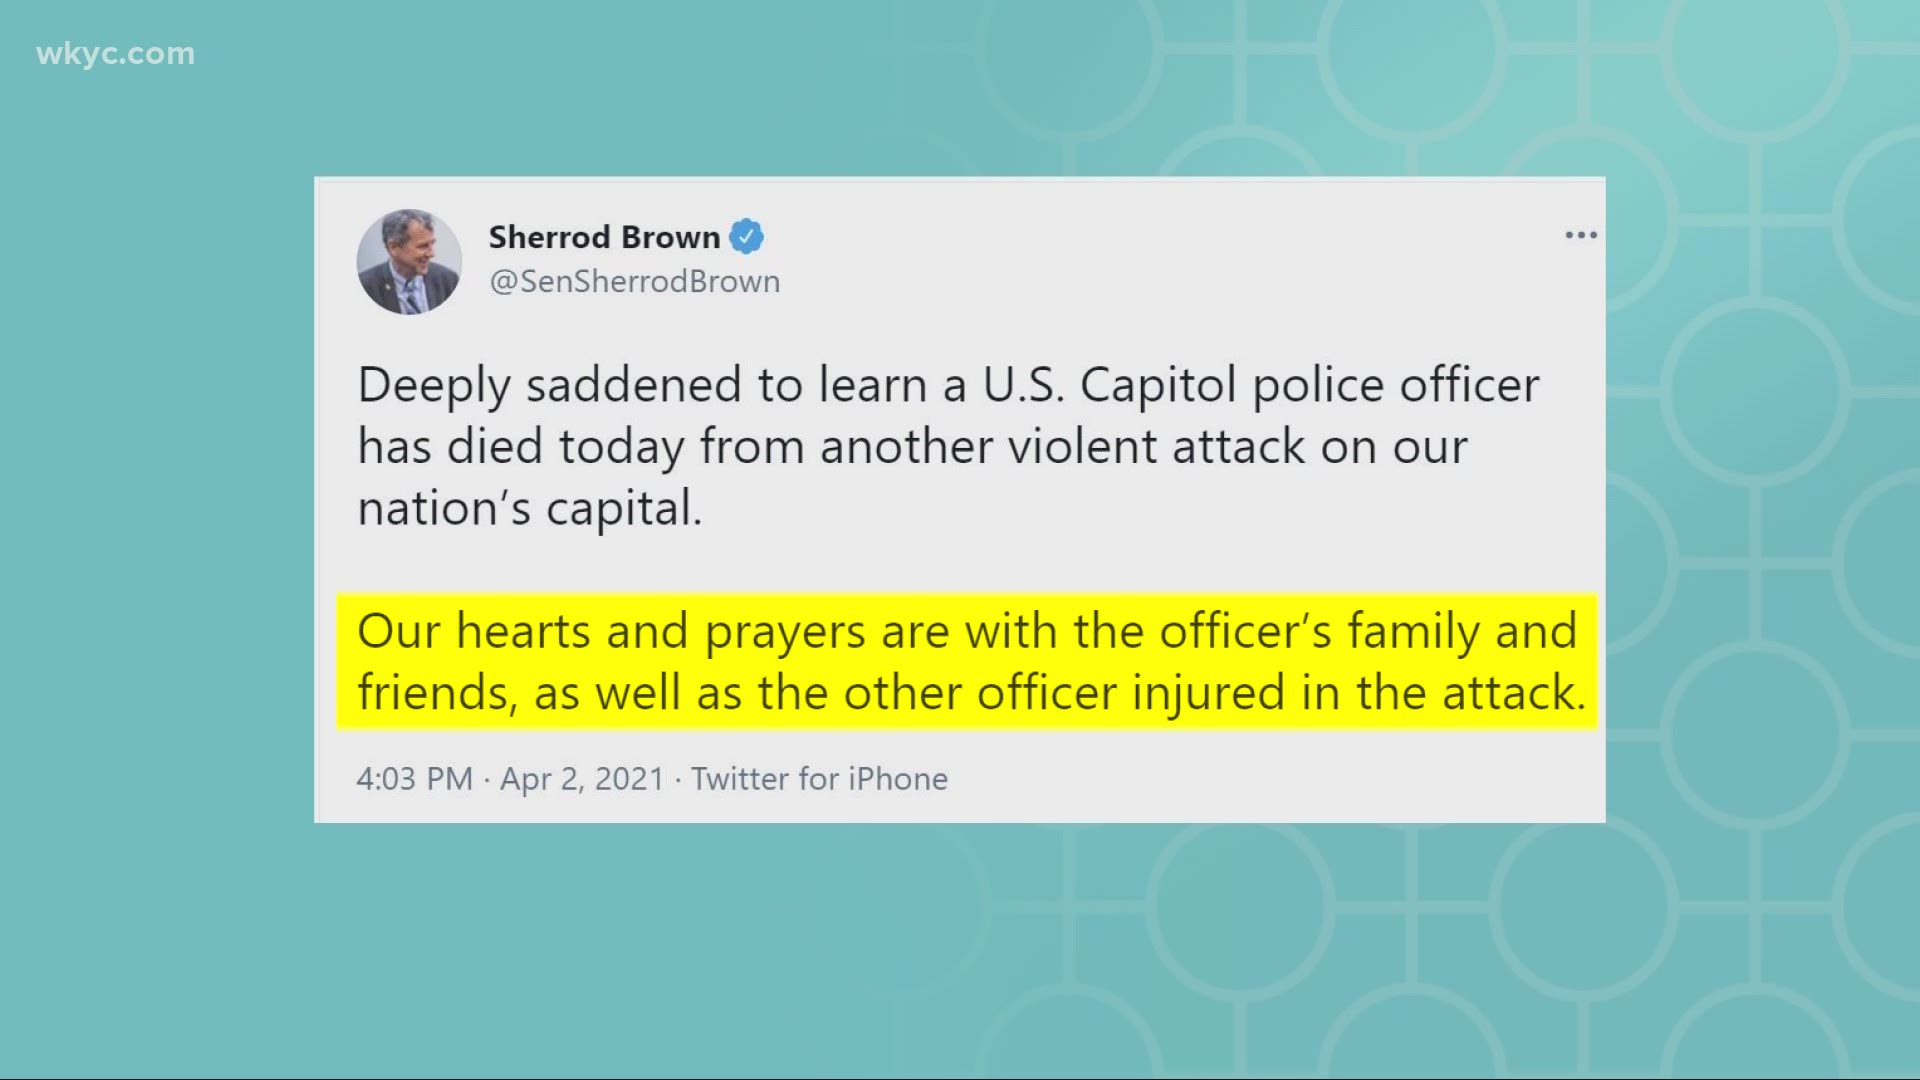 "Deeply saddened to learn a U.S. Capitol police officer has died today from another violent attack on our nation’s capital," said Sen. Sherrod Brown.